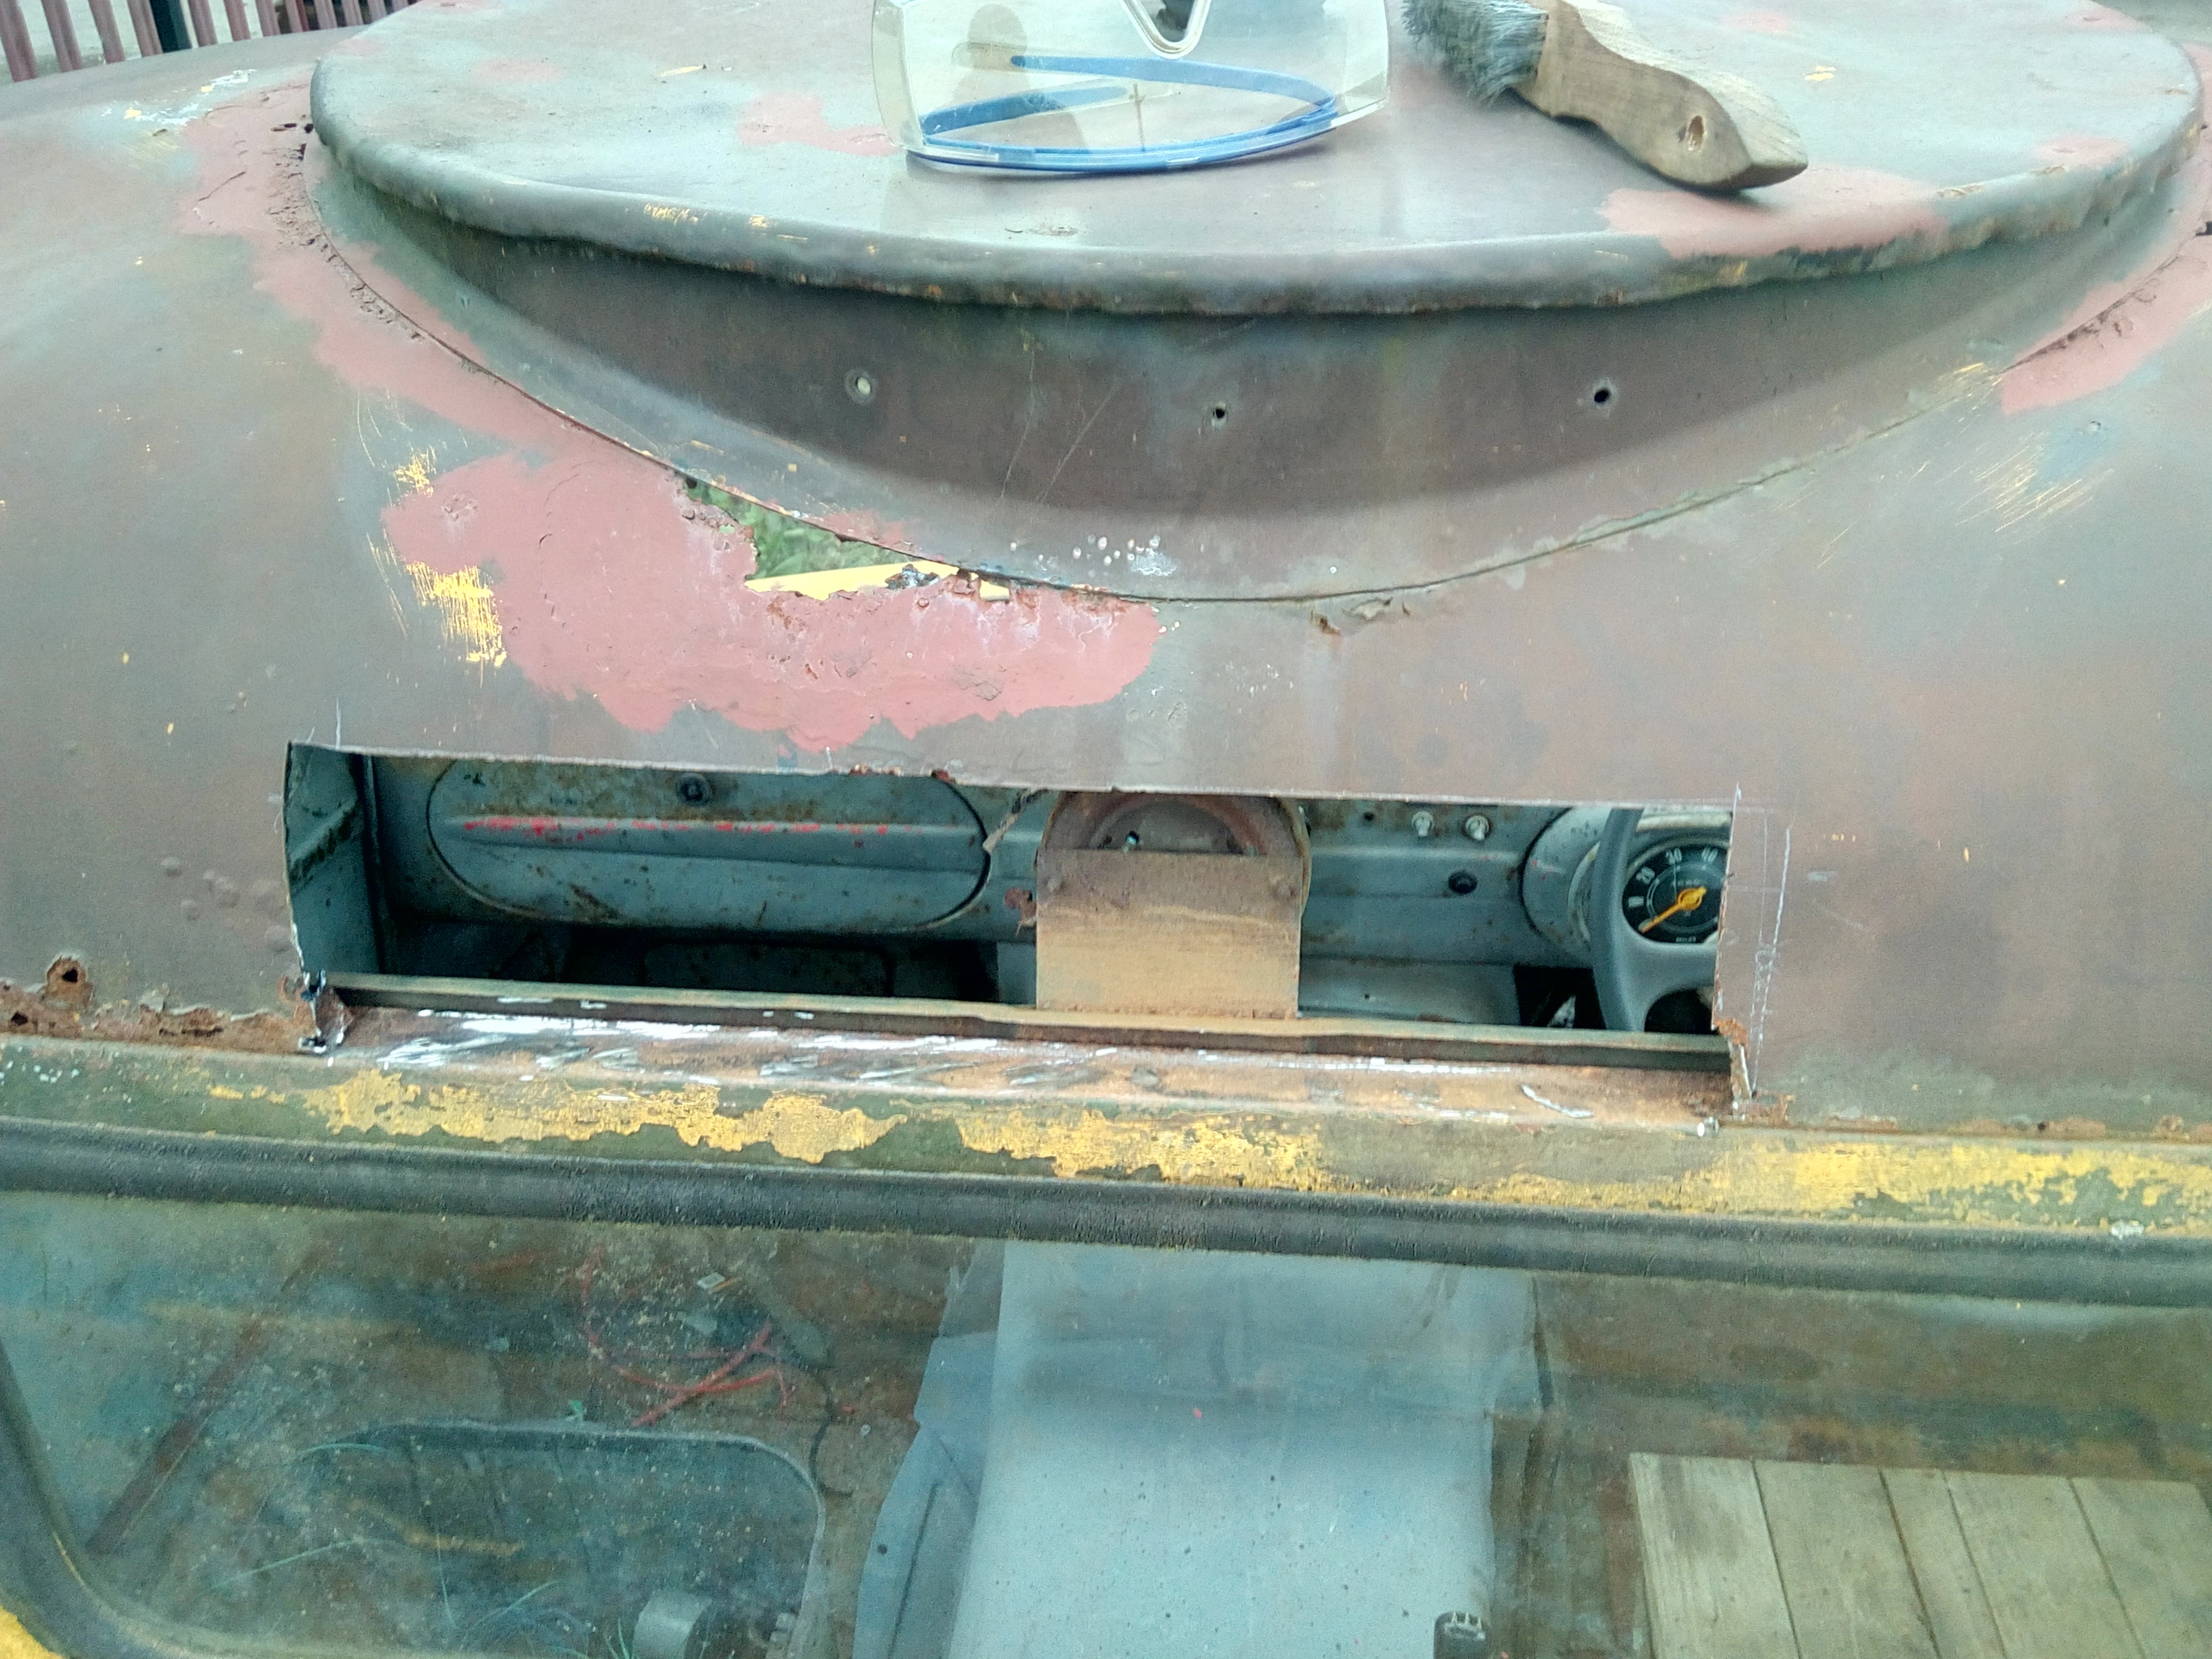 The back of the cab roof, now with a large section of rotten
metal cut out, leaving an even bigger -- but significantly neater --
hole through which the dashboard of the cab can be seen.